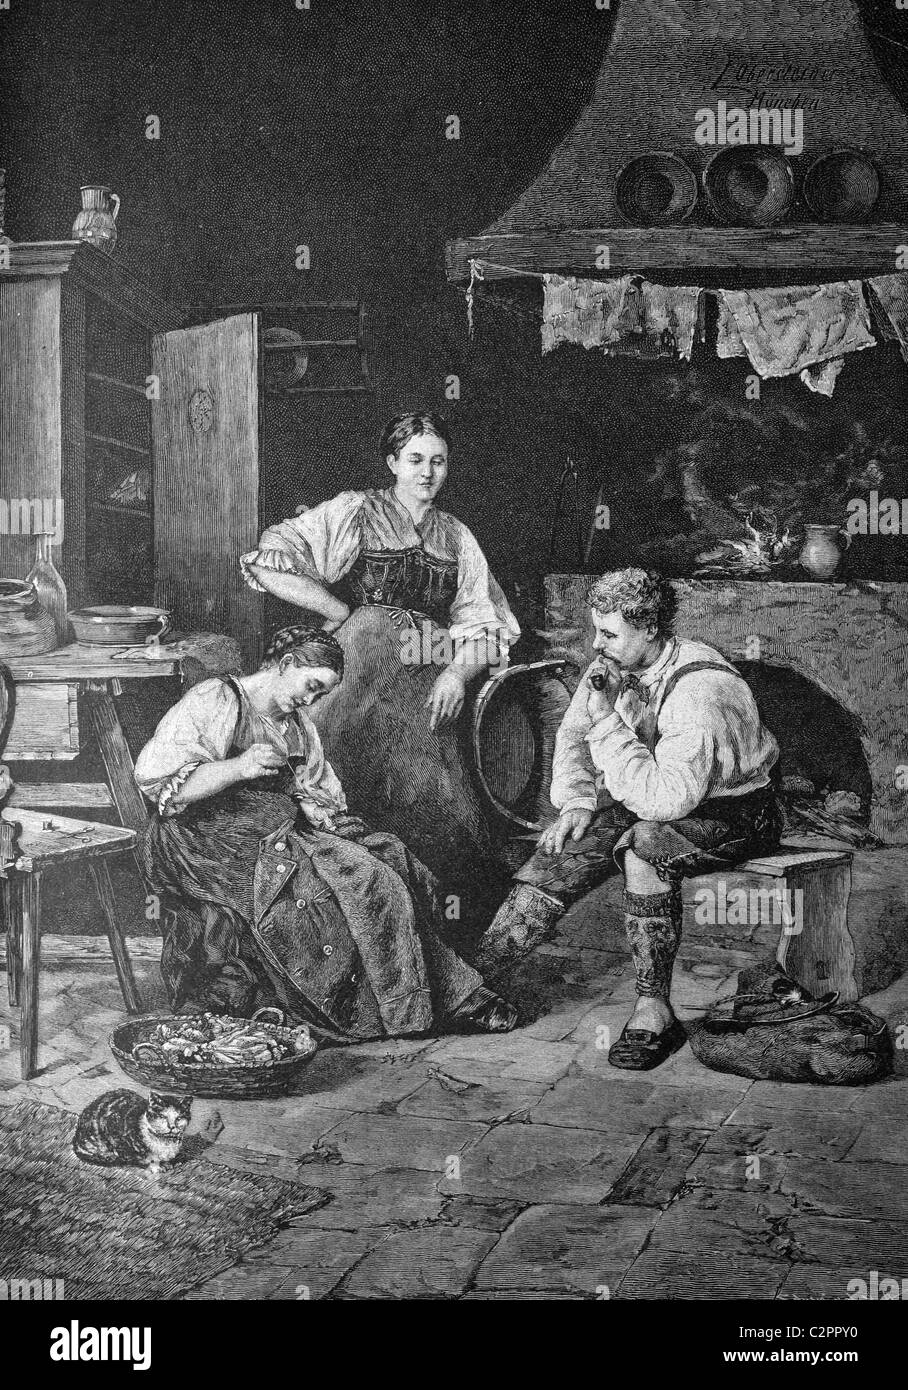 Sewing, historical illustration, about 1886 Stock Photo